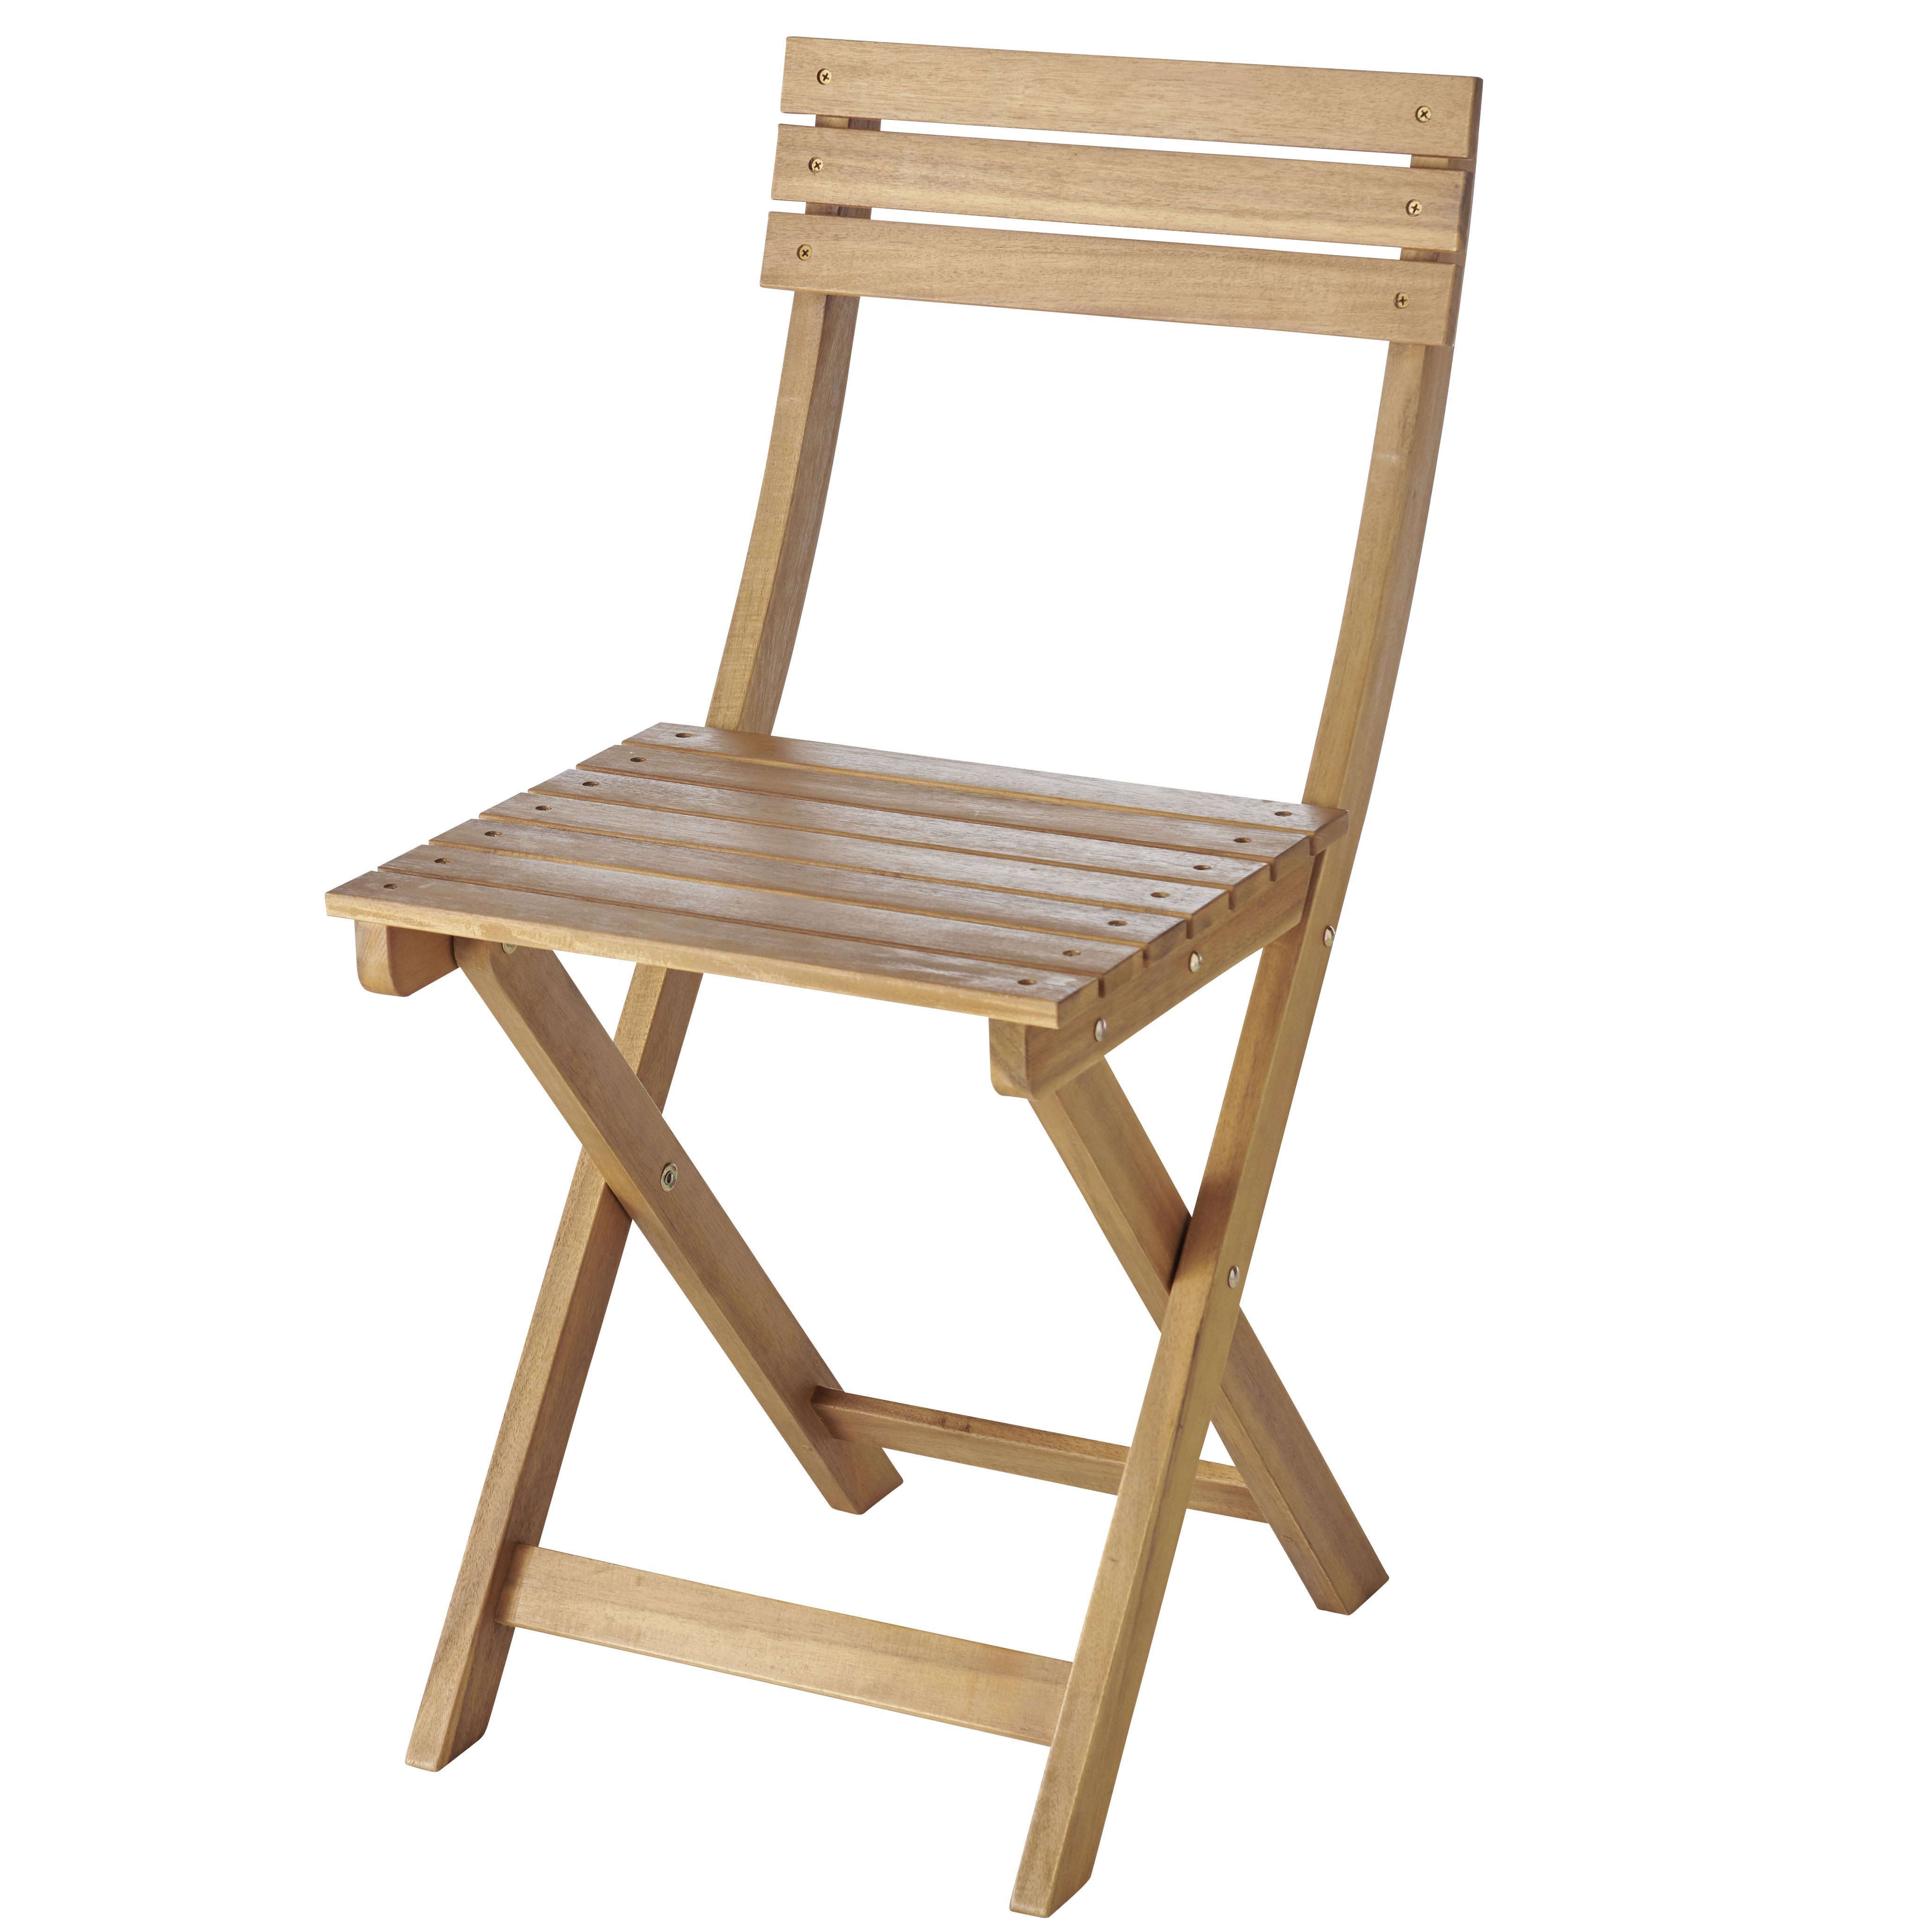 GoodHome Virginia Acacia Wooden Foldable Chair, Pack of 2